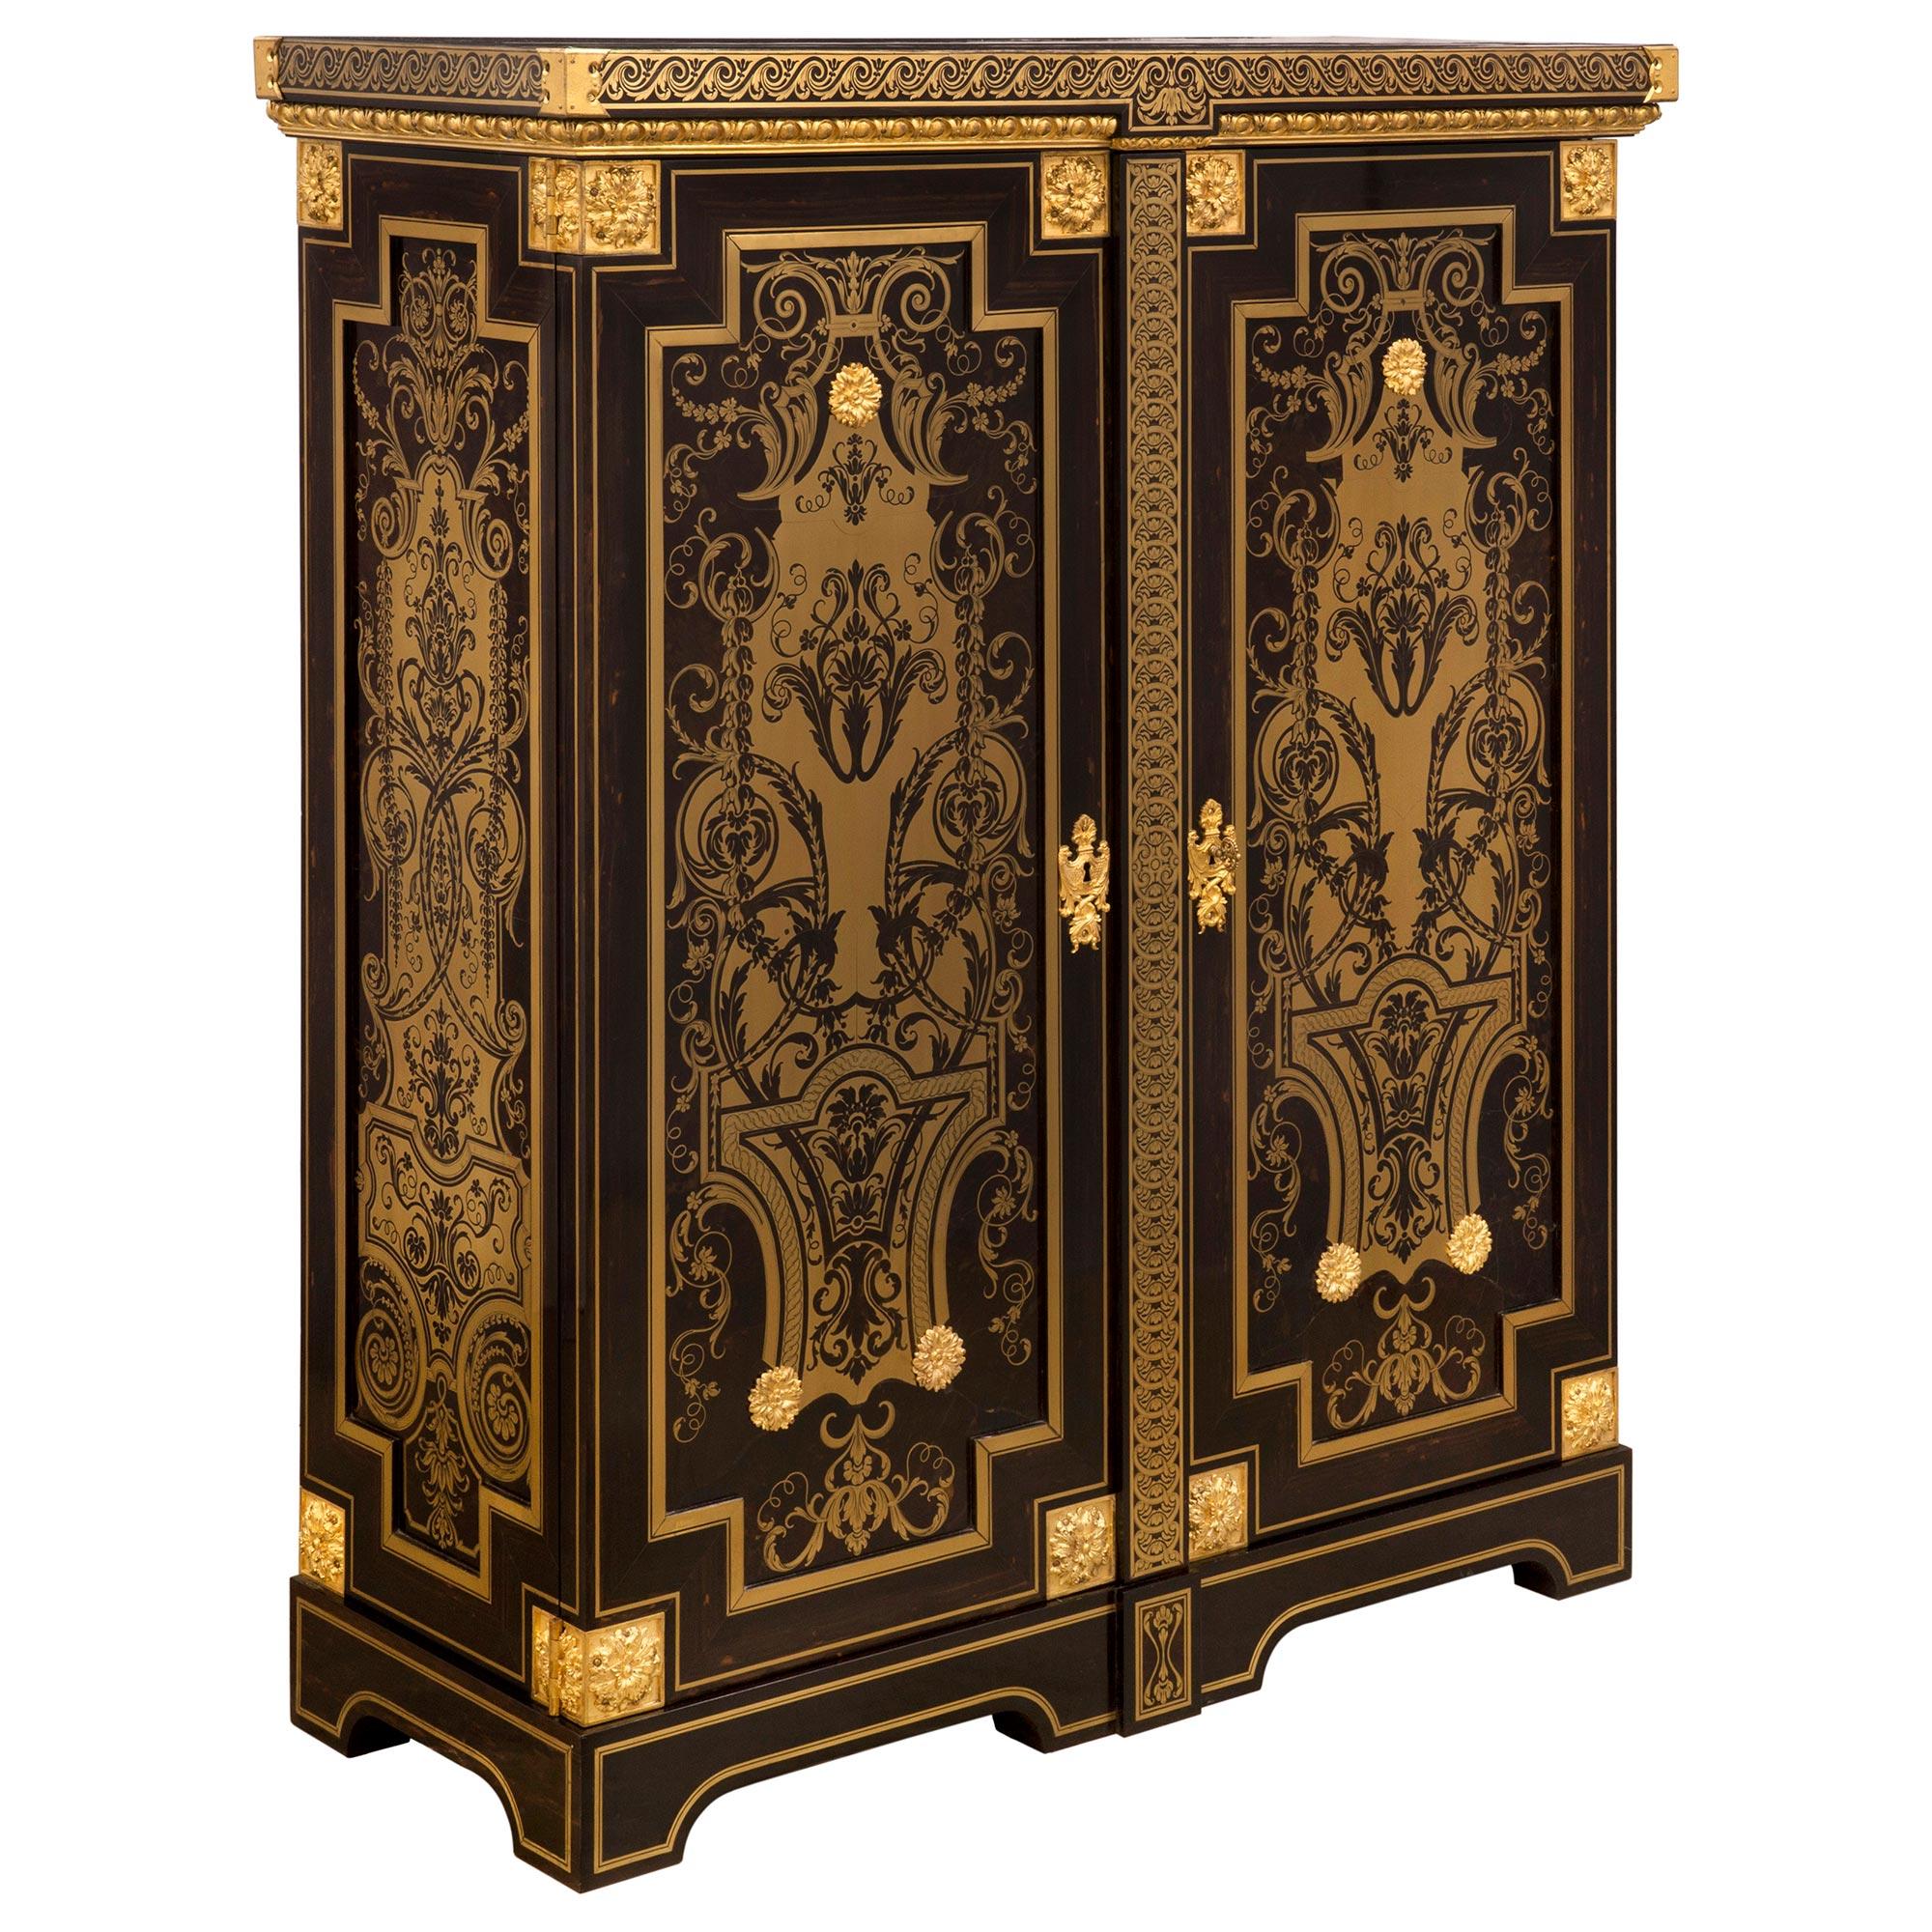 A spectacular French 19th century Louis XIV st. ebony, brass and ormolu cabinet, in the manner of A.C. Boulle. The exquisite cabinet is raised by elegant arched shaped supports with fine brass fillets and a central foliate reserve. The two central